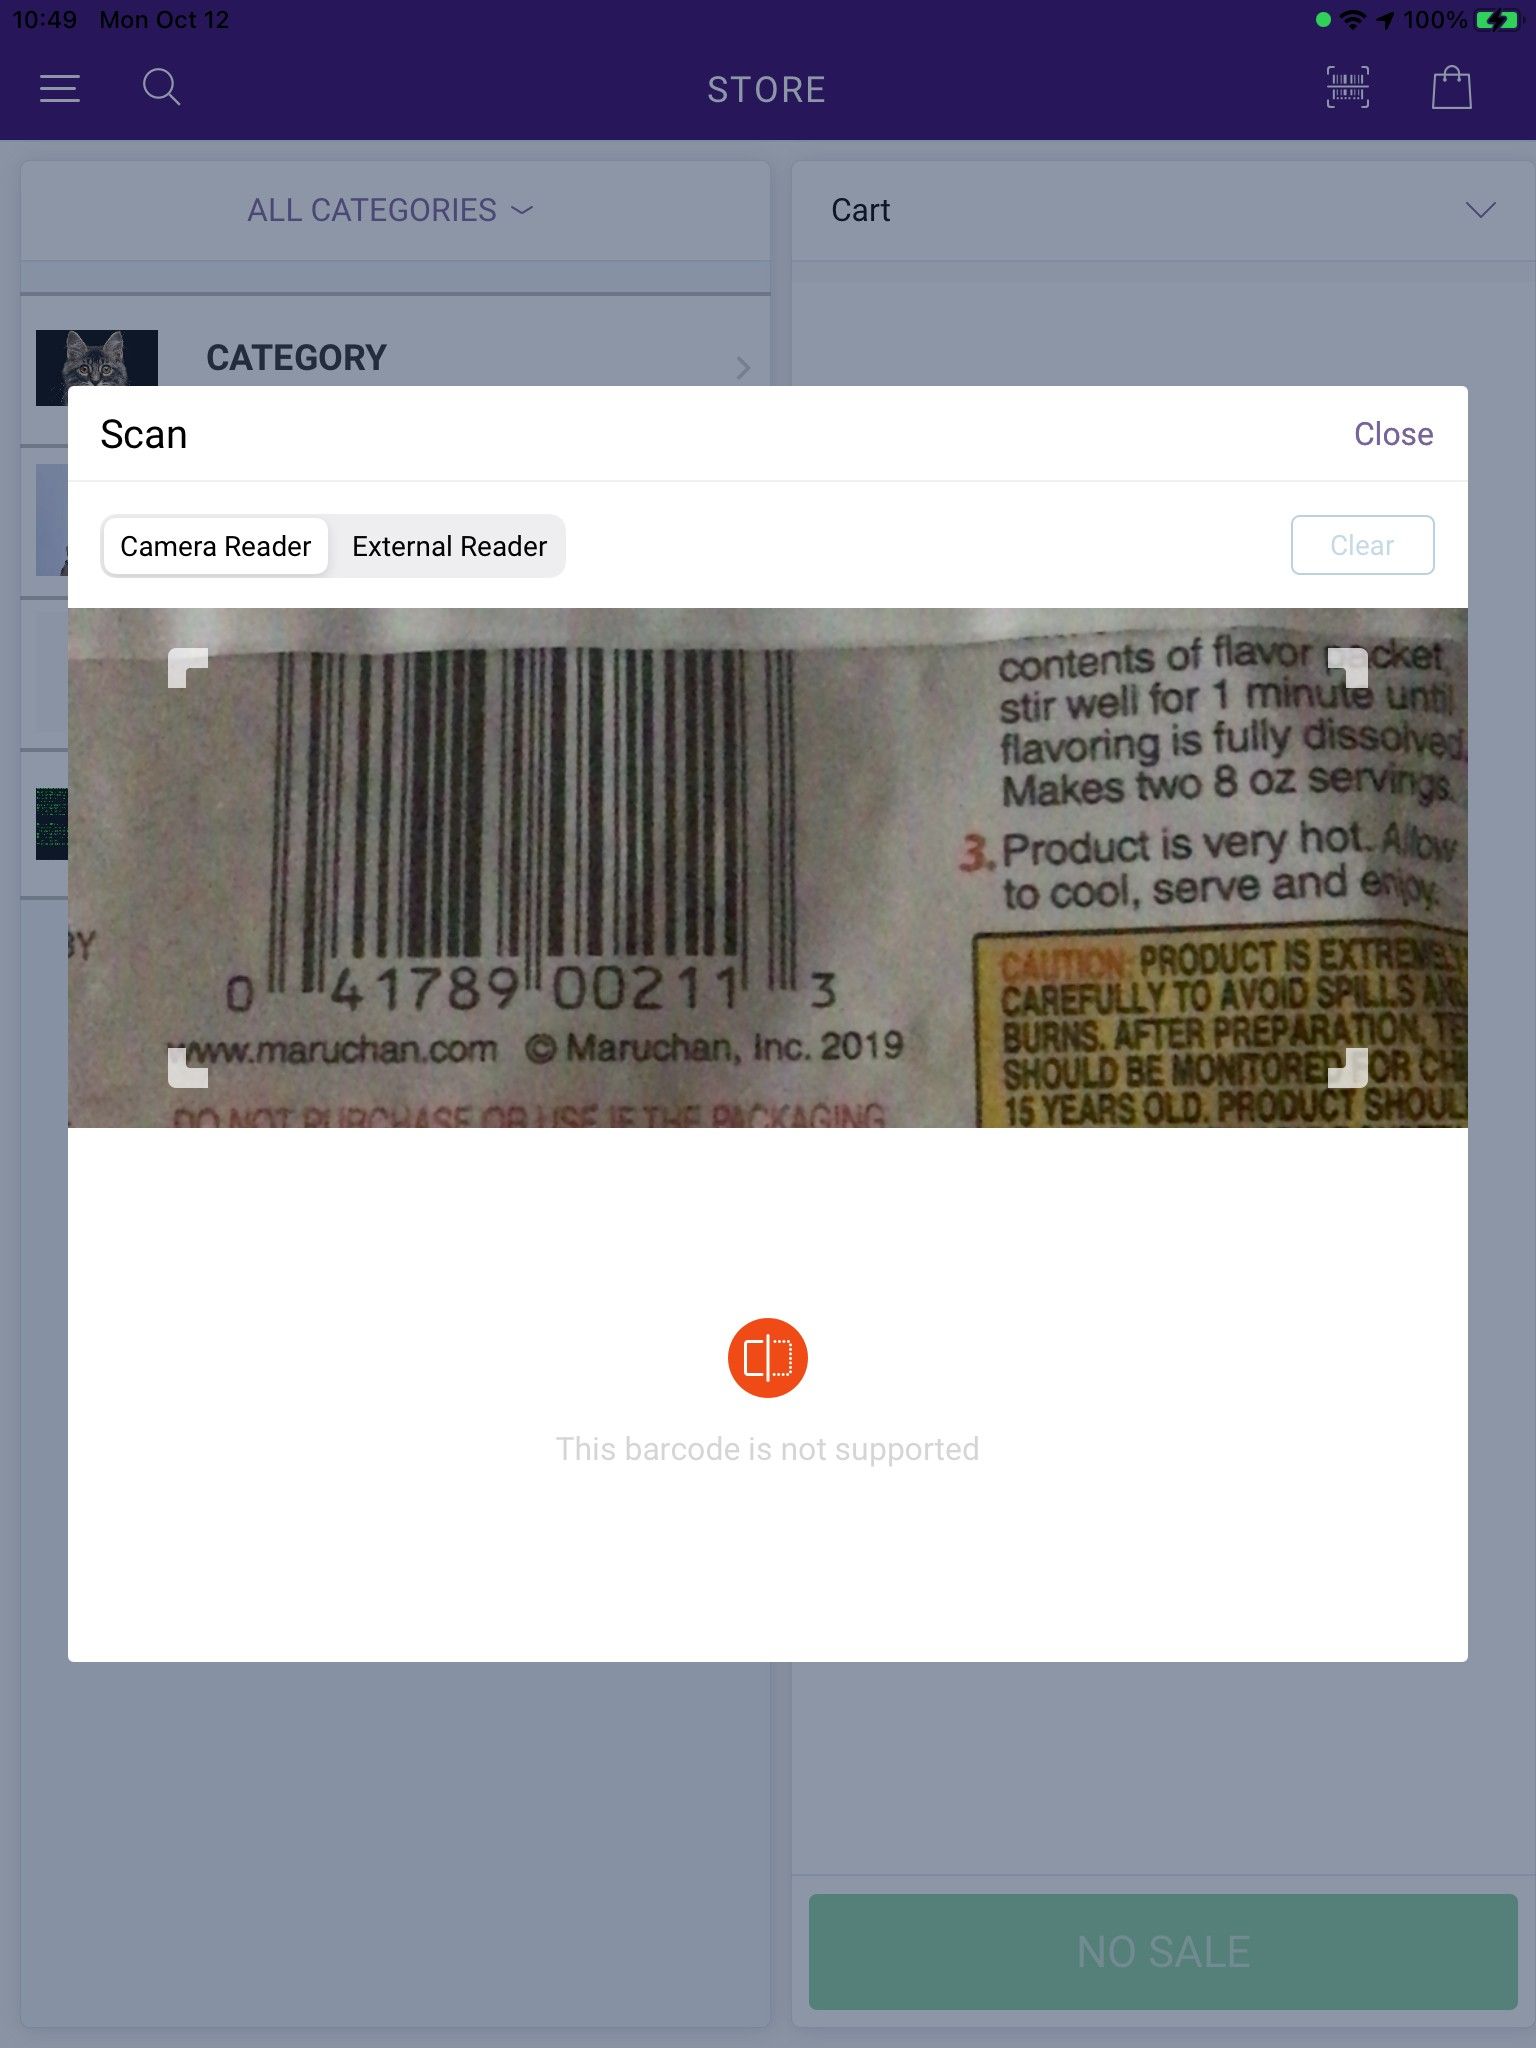 Example of scanning a barcode with the camera reader, with an error message for an unsupported barcode